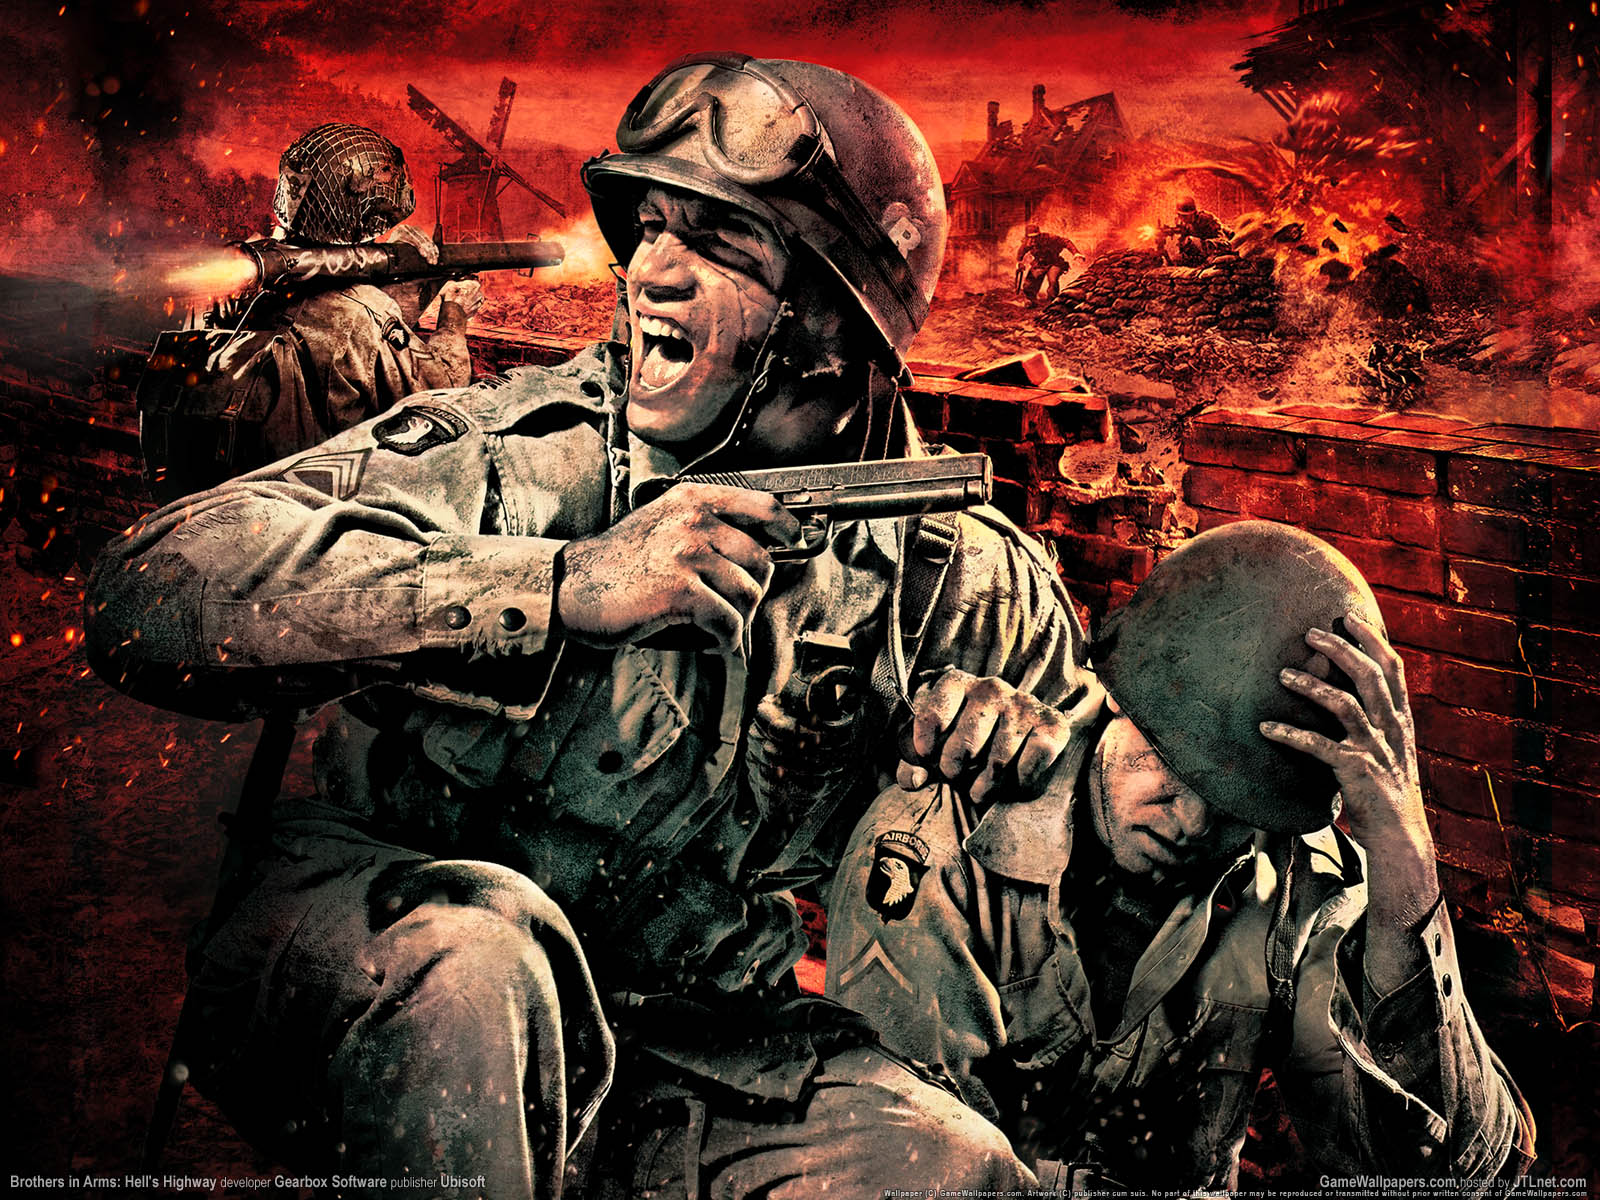 Brothers in Arms%3A Hell%5C%27s Highway wallpaper 06 1600x1200